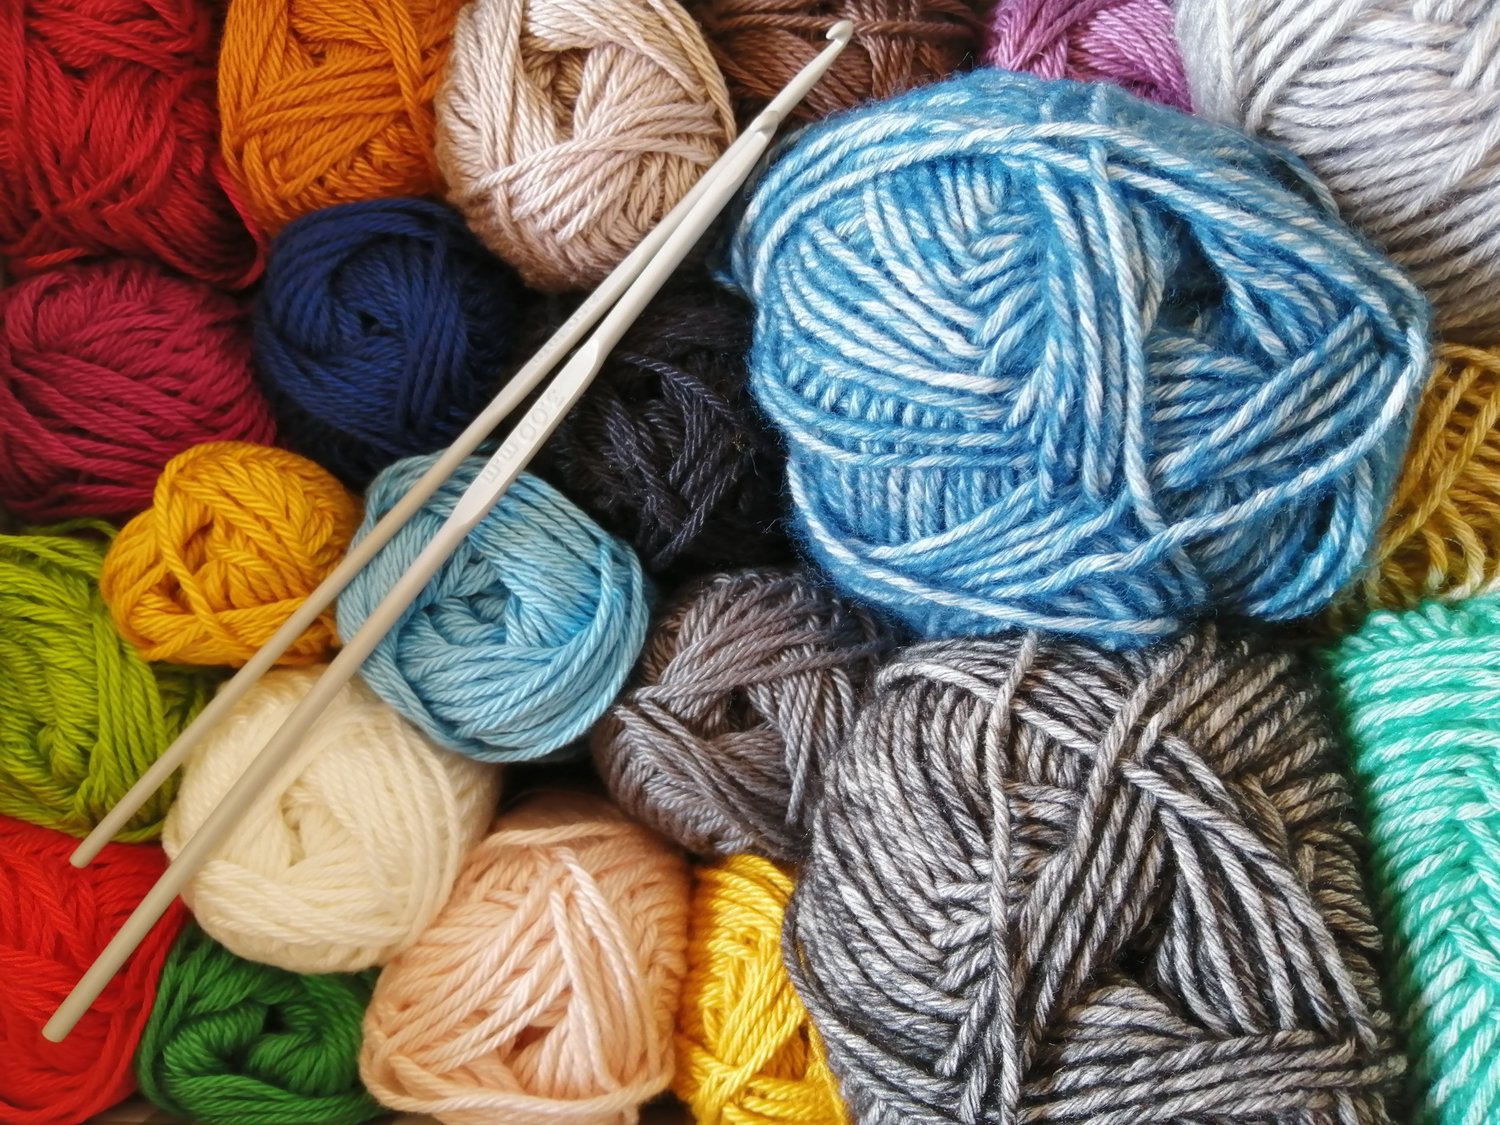 Join the needlecraft circle at the Jeffersonville branch of the WSPL.